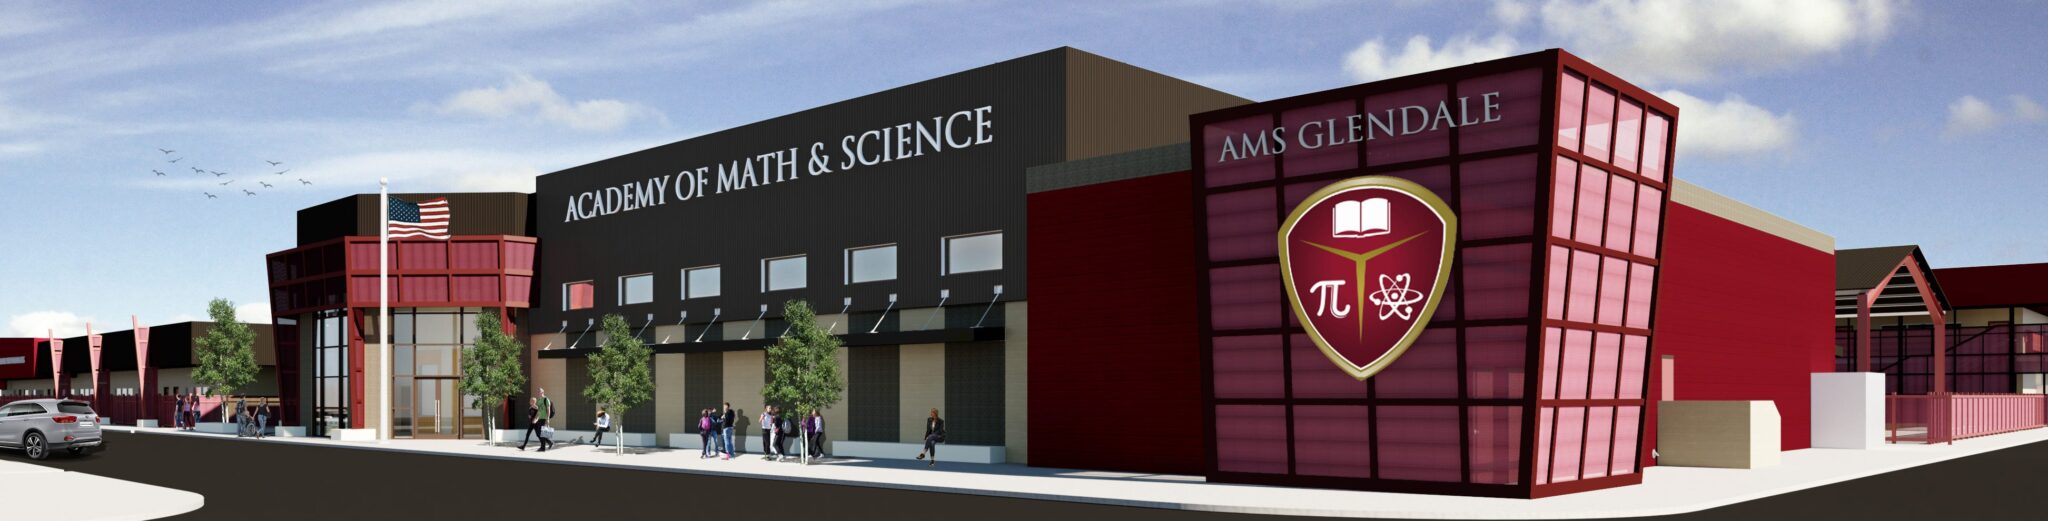 AMS Glendale K8 Charter School Academies of Math and Science